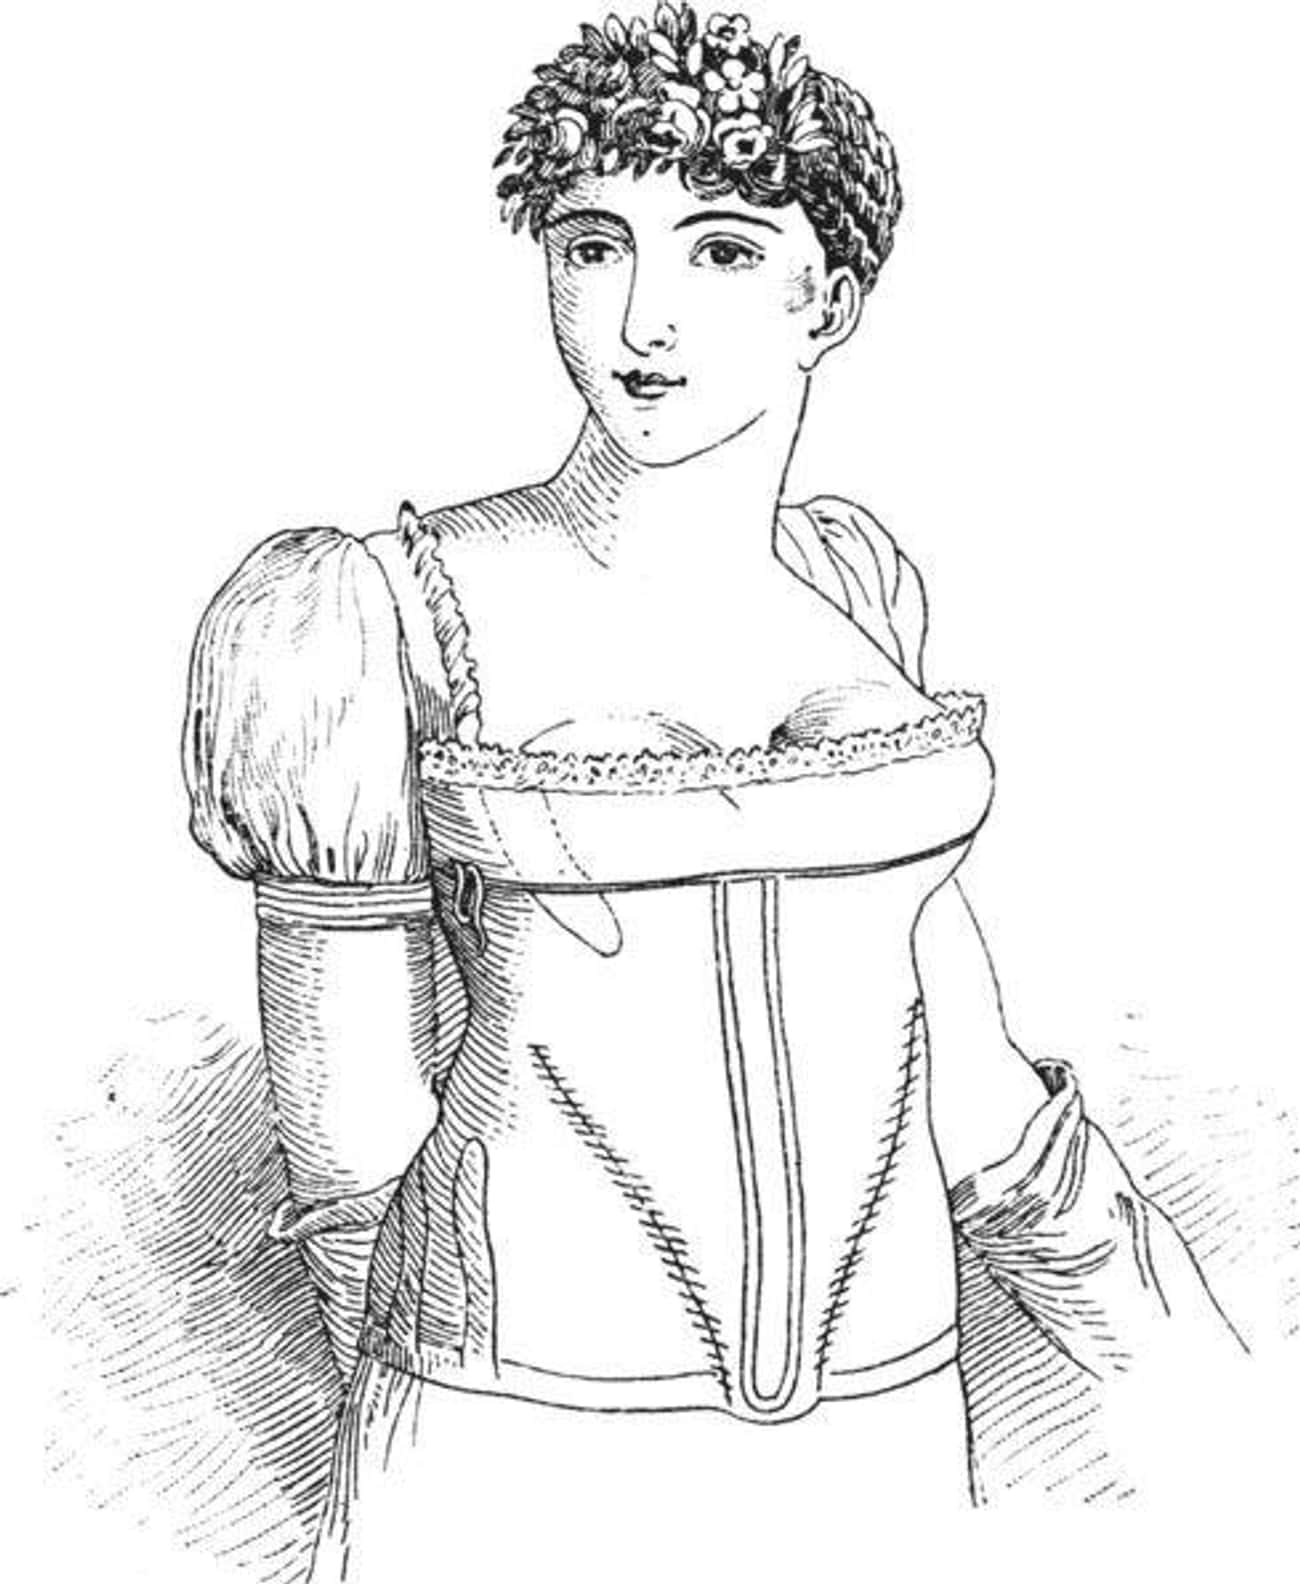 A Desire For Separated Breasts Created The "Divorce Corset"